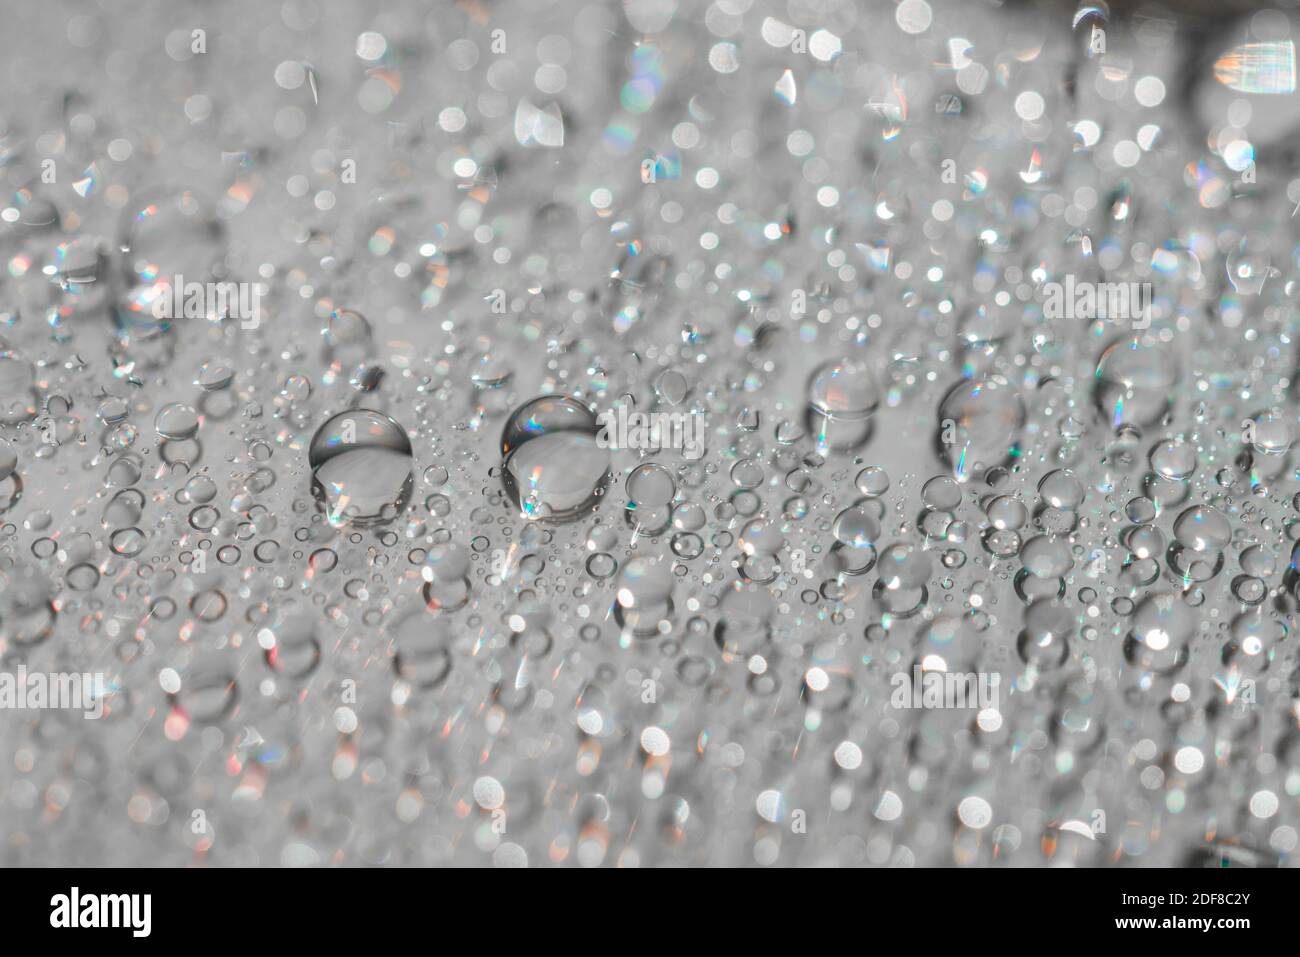 Macro photography of water drops on a mirror reflective surface. Stock Photo